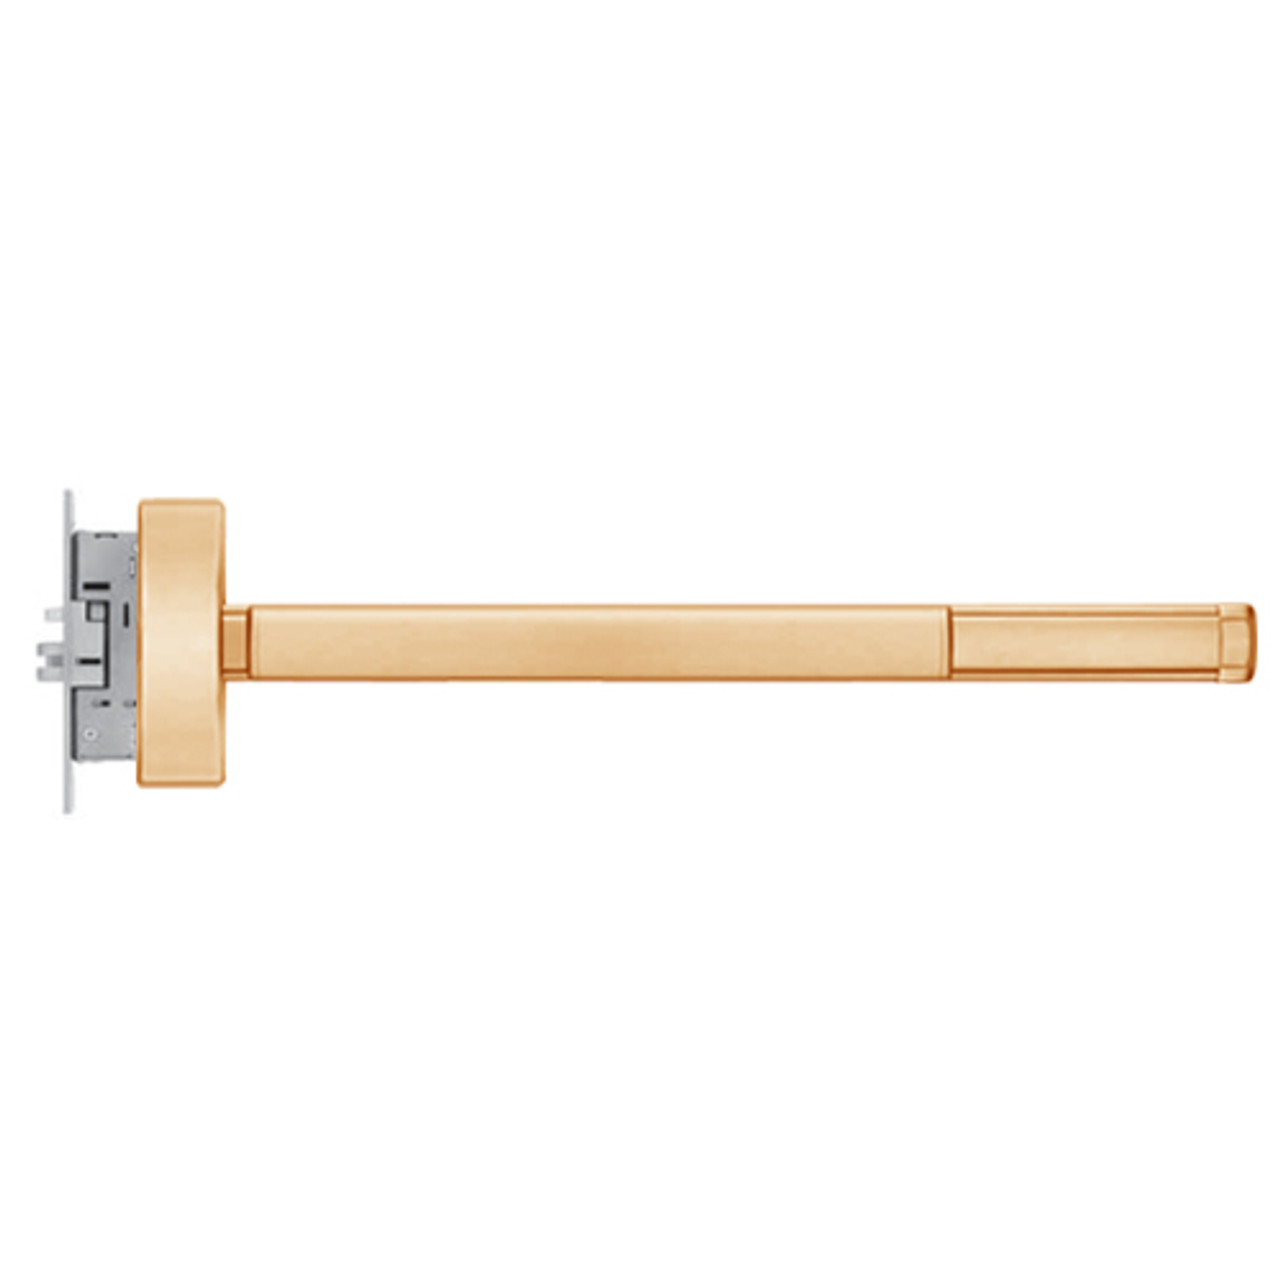 TS2314-LHR-612-48 PHI 2300 Series Apex Mortise Exit Device with Touchbar Monitoring Switch Prepped for Lever-Knob Always Active in Satin Bronze Finish